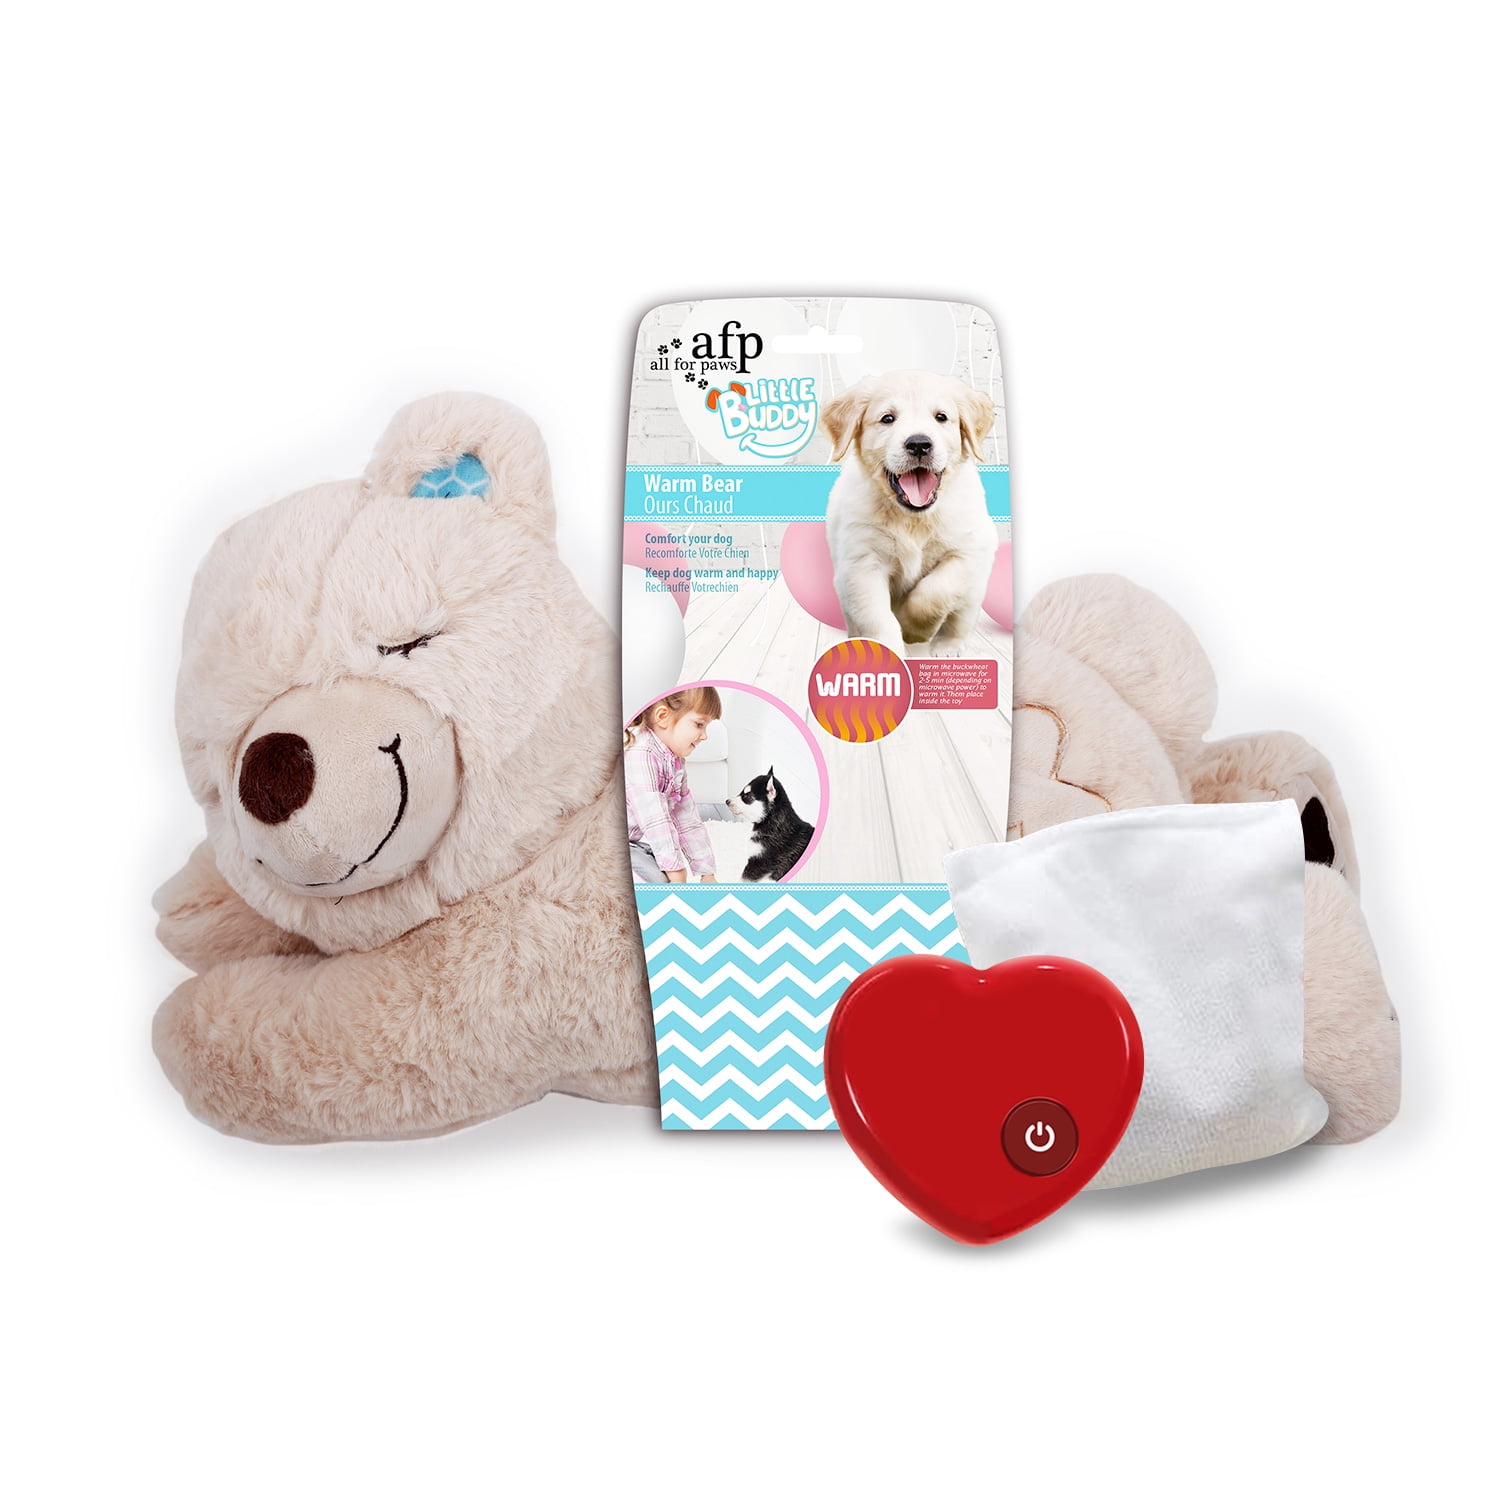 Heartbeat Puppy Toy,comfort Cuddler Pillow, Dog Anxiety Toy,pillow